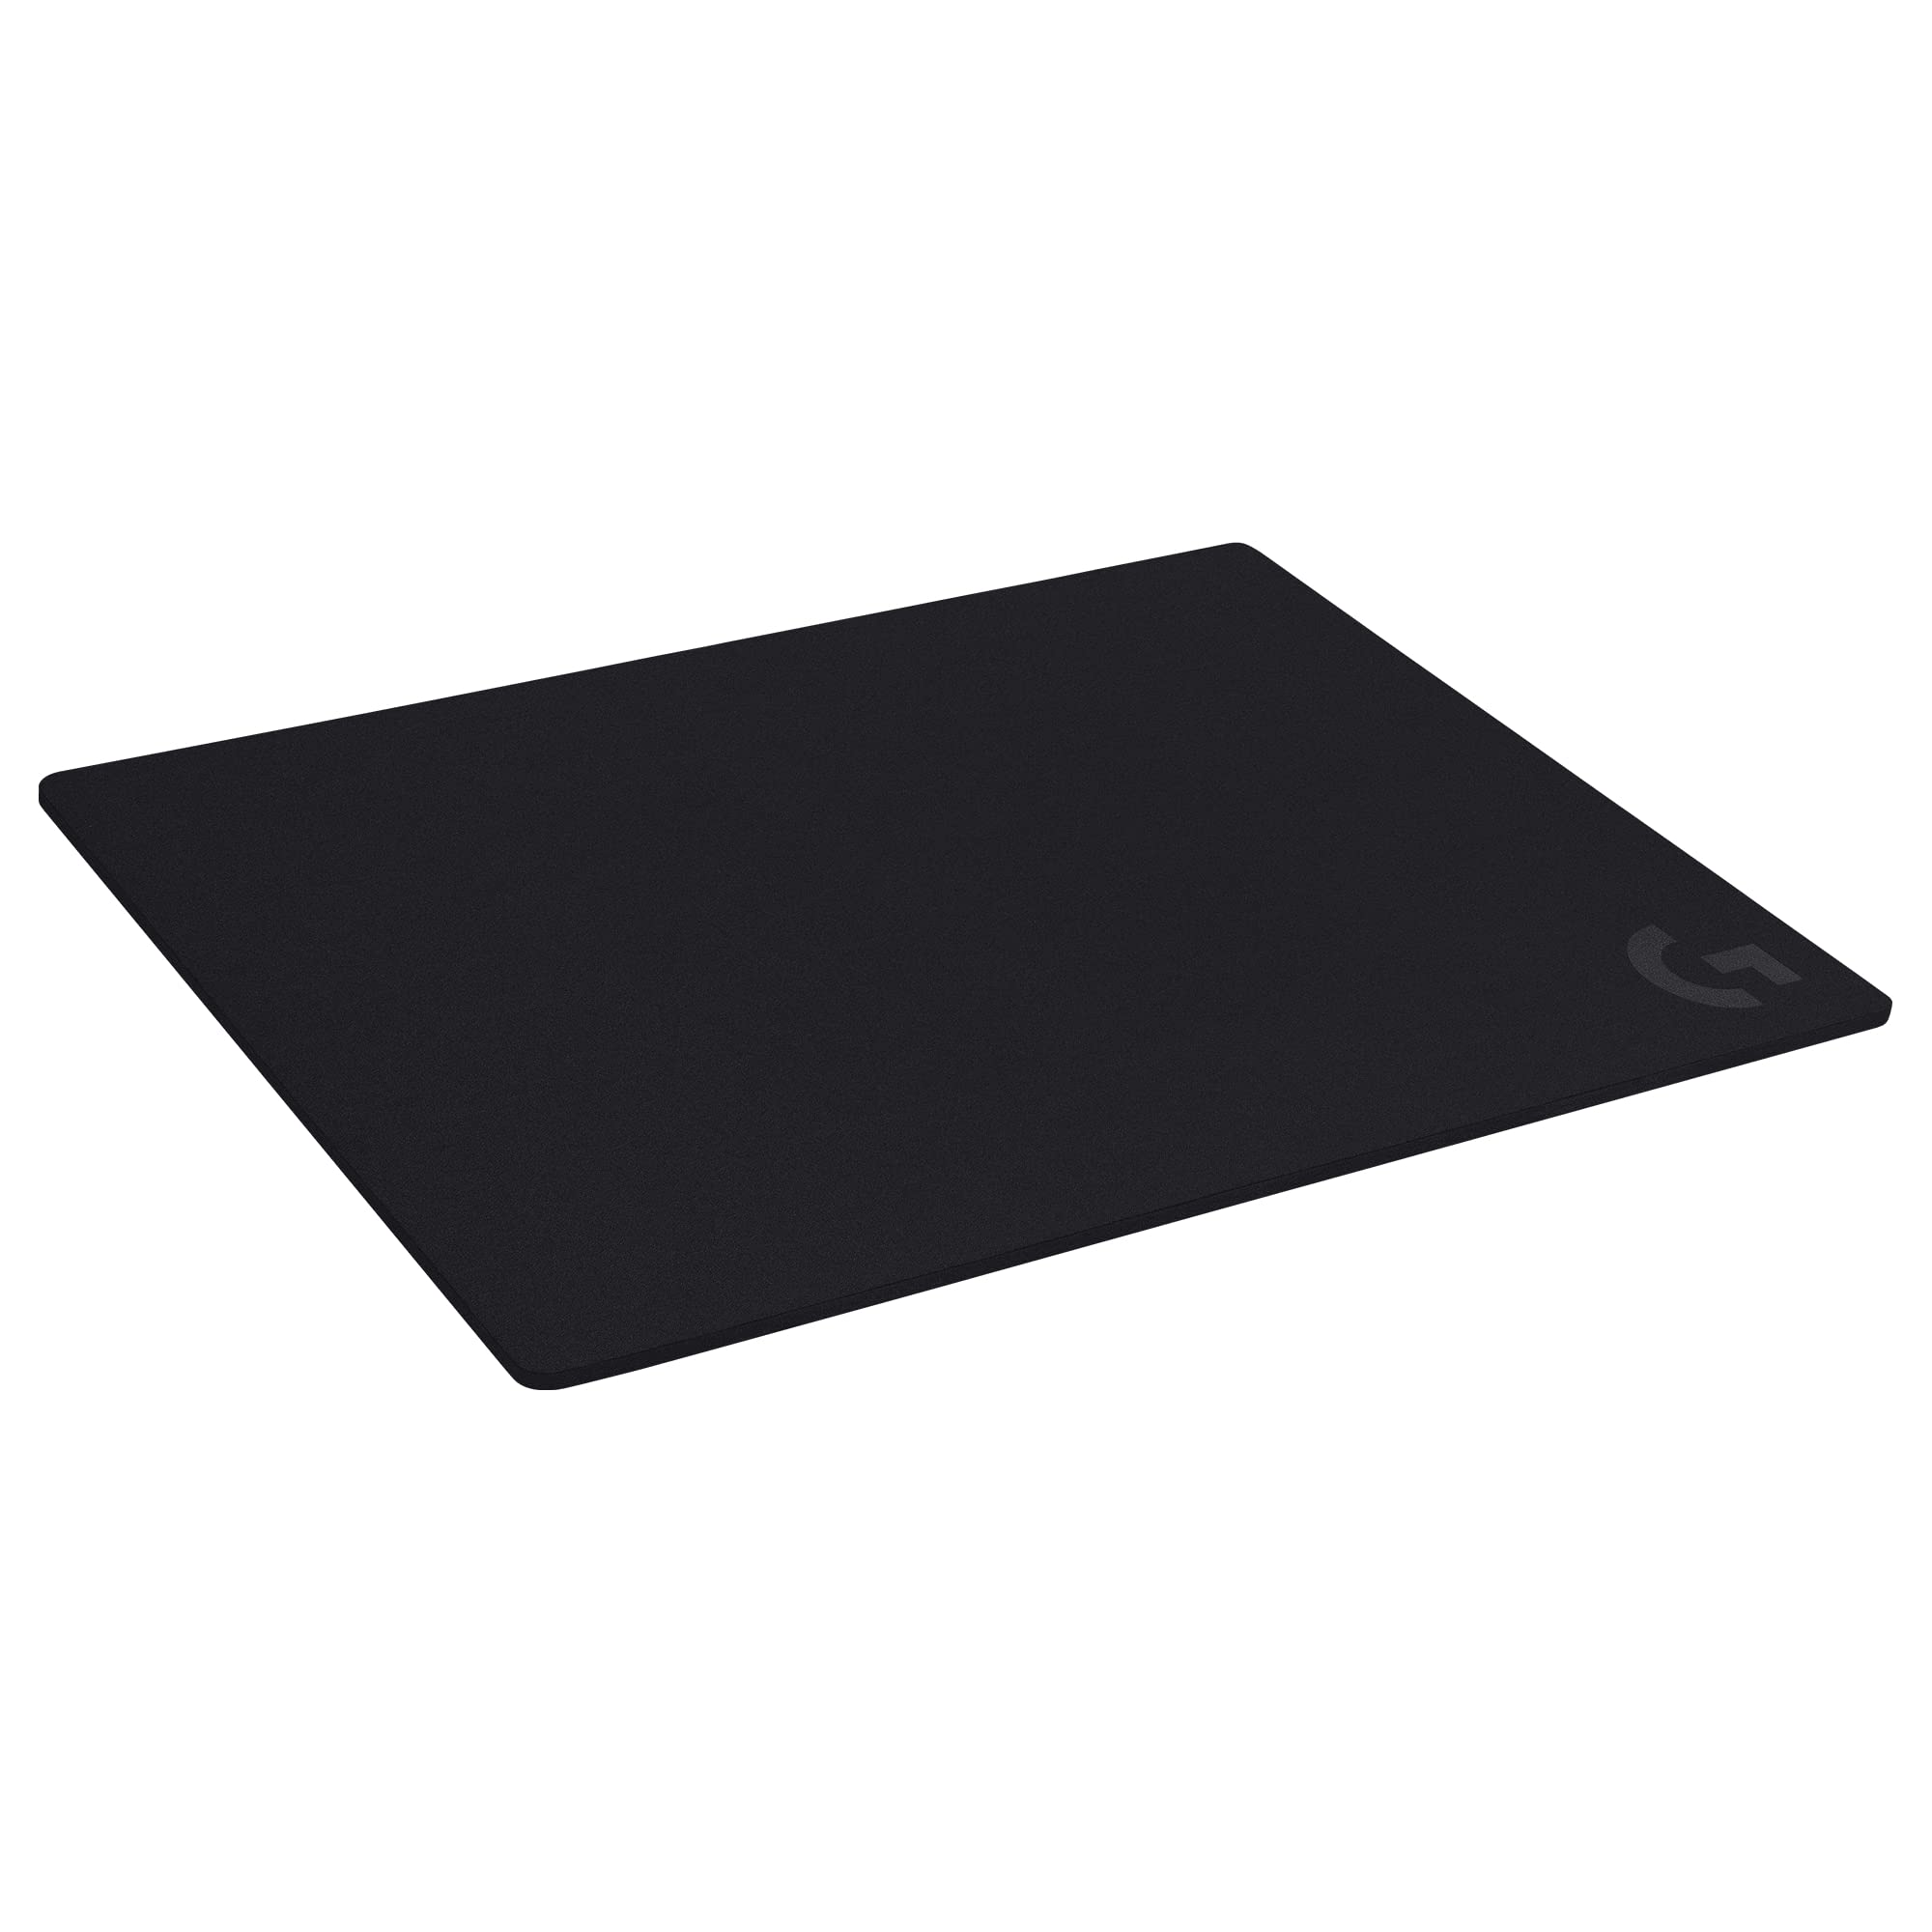 $24.99: Logitech G740 Large Thick Gaming Mouse Pad, 460 x 600 x 5 mm